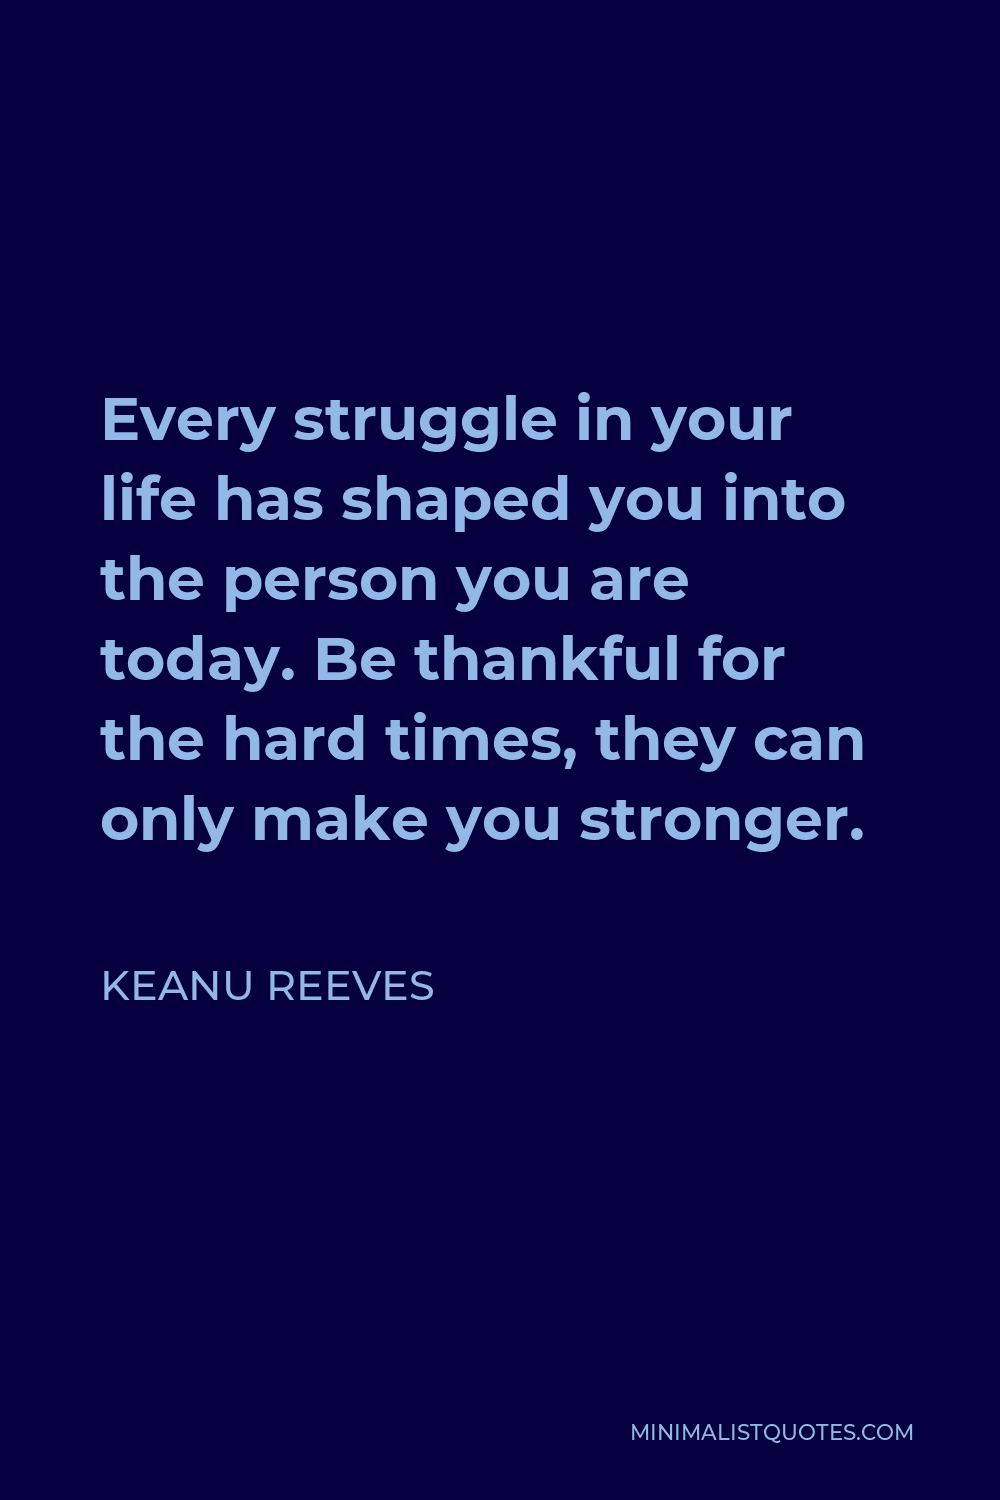 Keanu Reeves Quote - Every struggle in your life has shaped you into the person you are today. Be thankful for the hard times, they can only make you stronger.